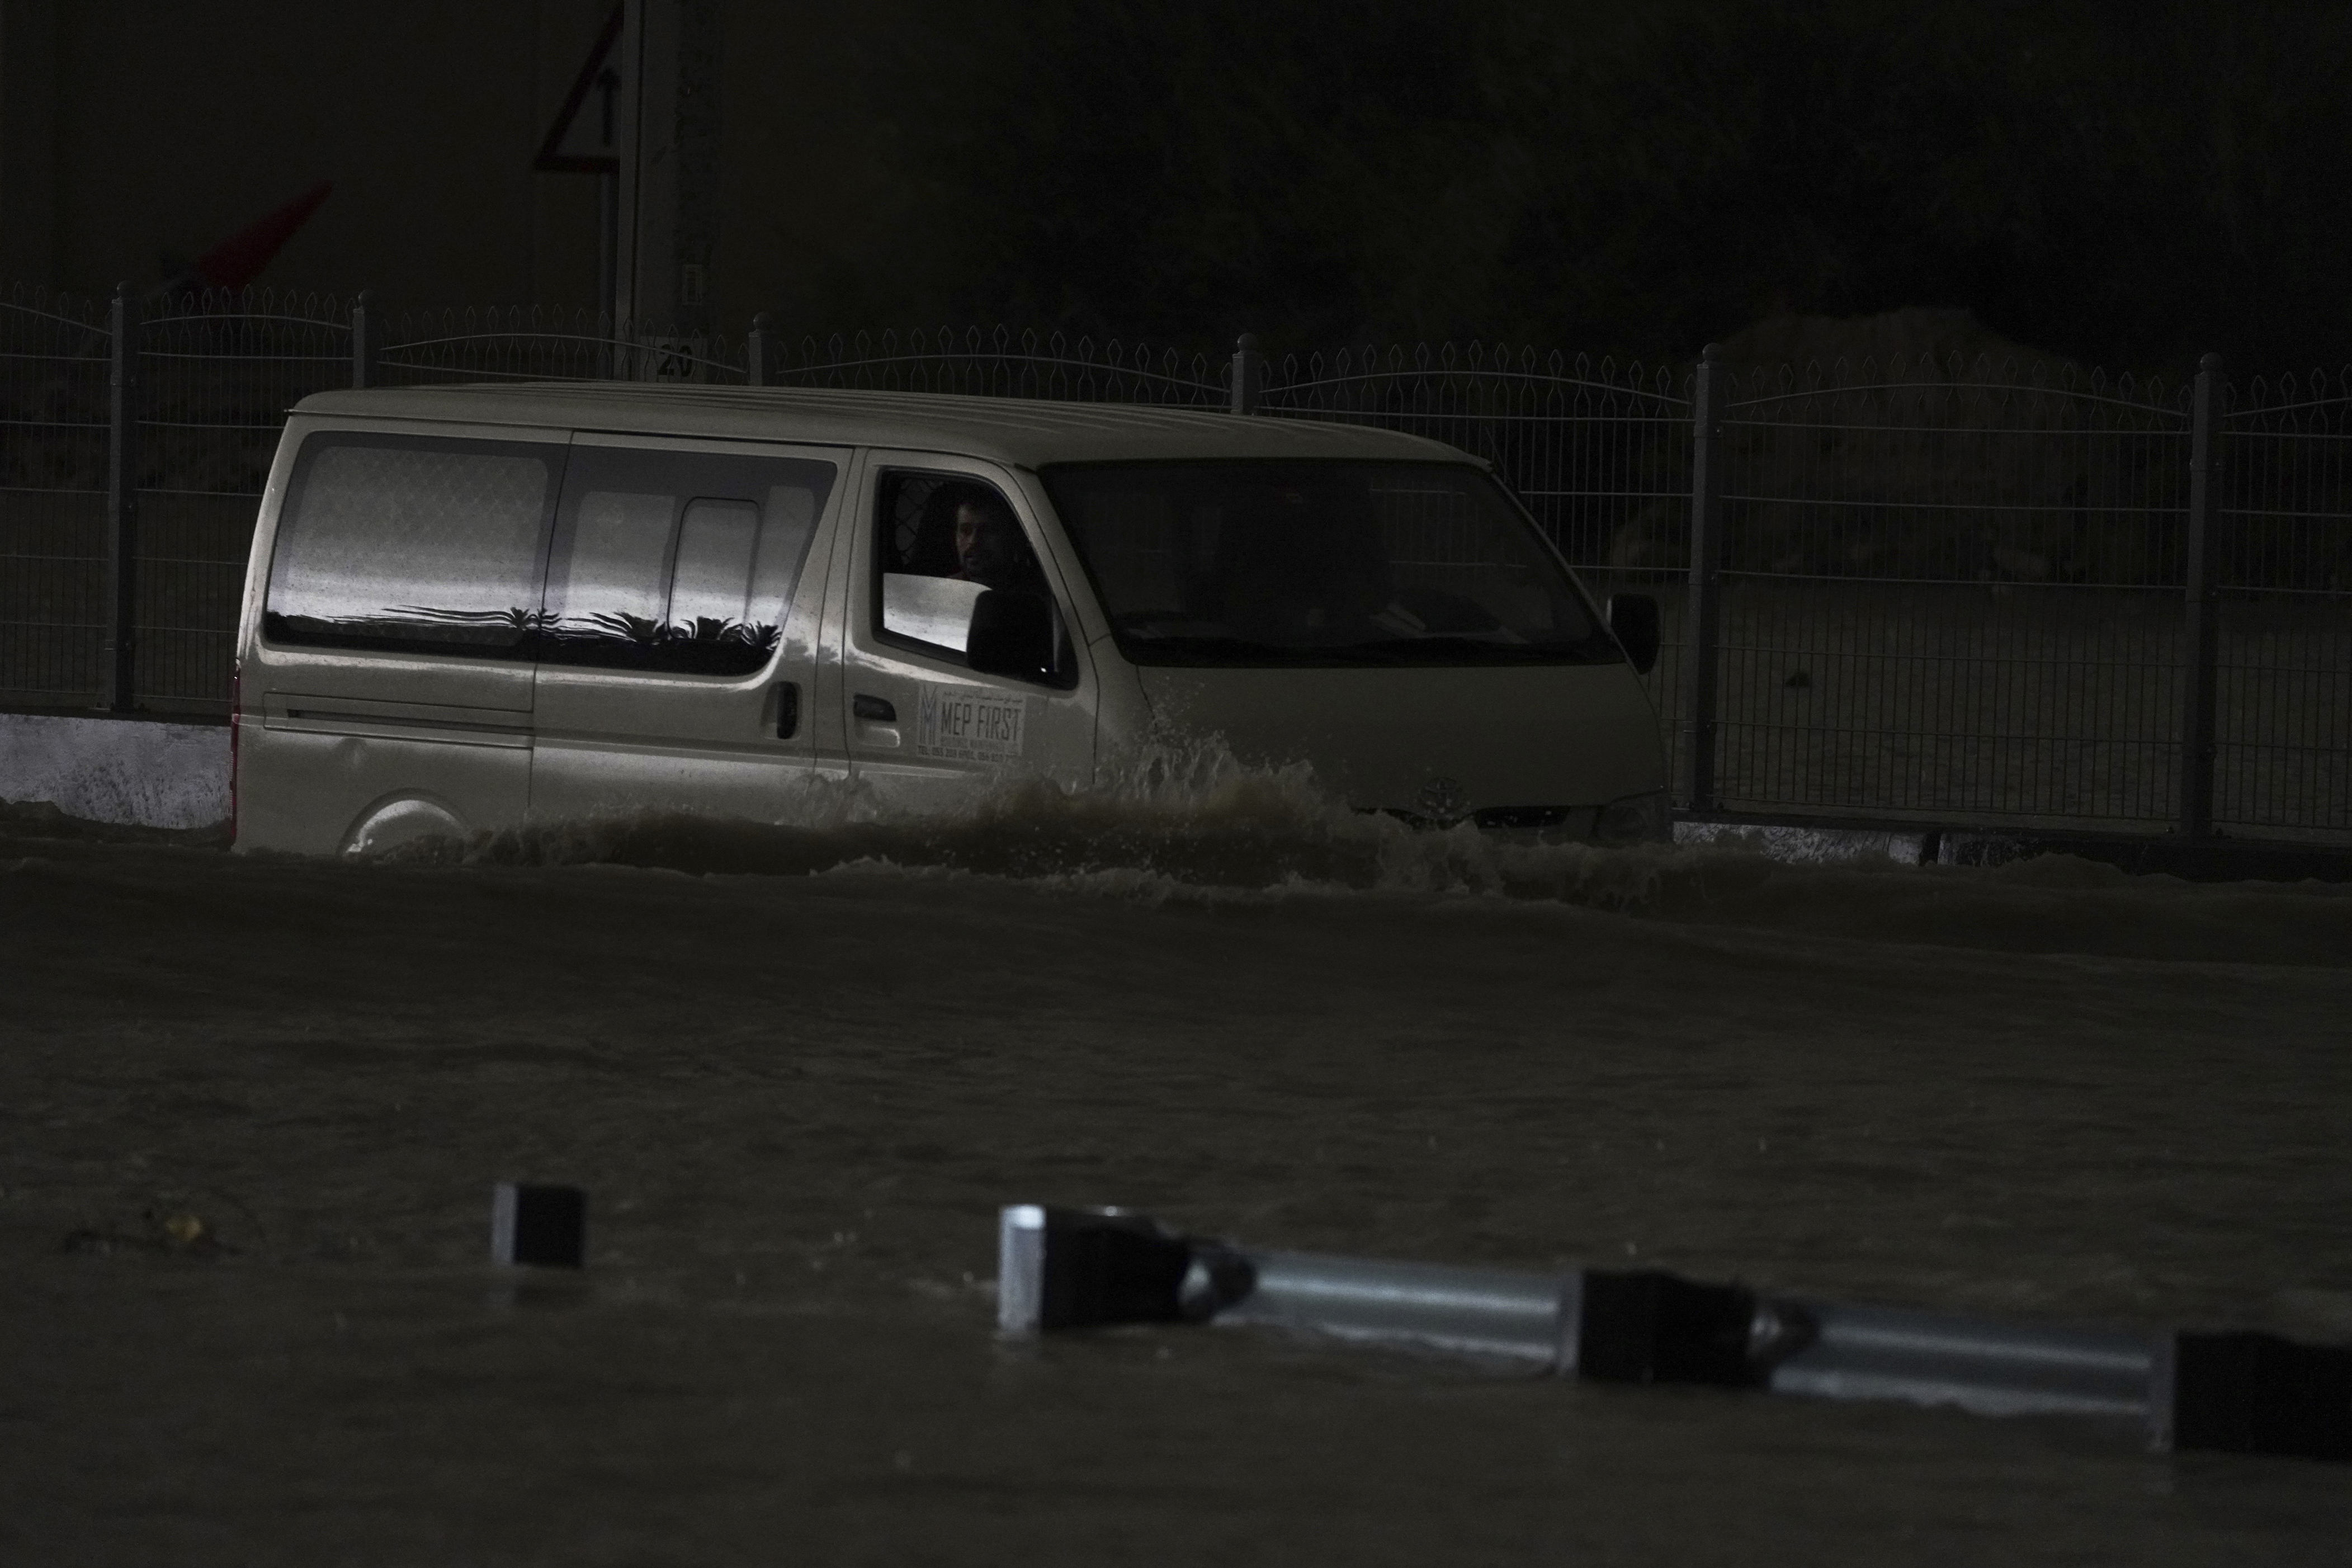 storm dumps heaviest rain ever recorded in desert nation of uae, flooding roads and dubai's airport